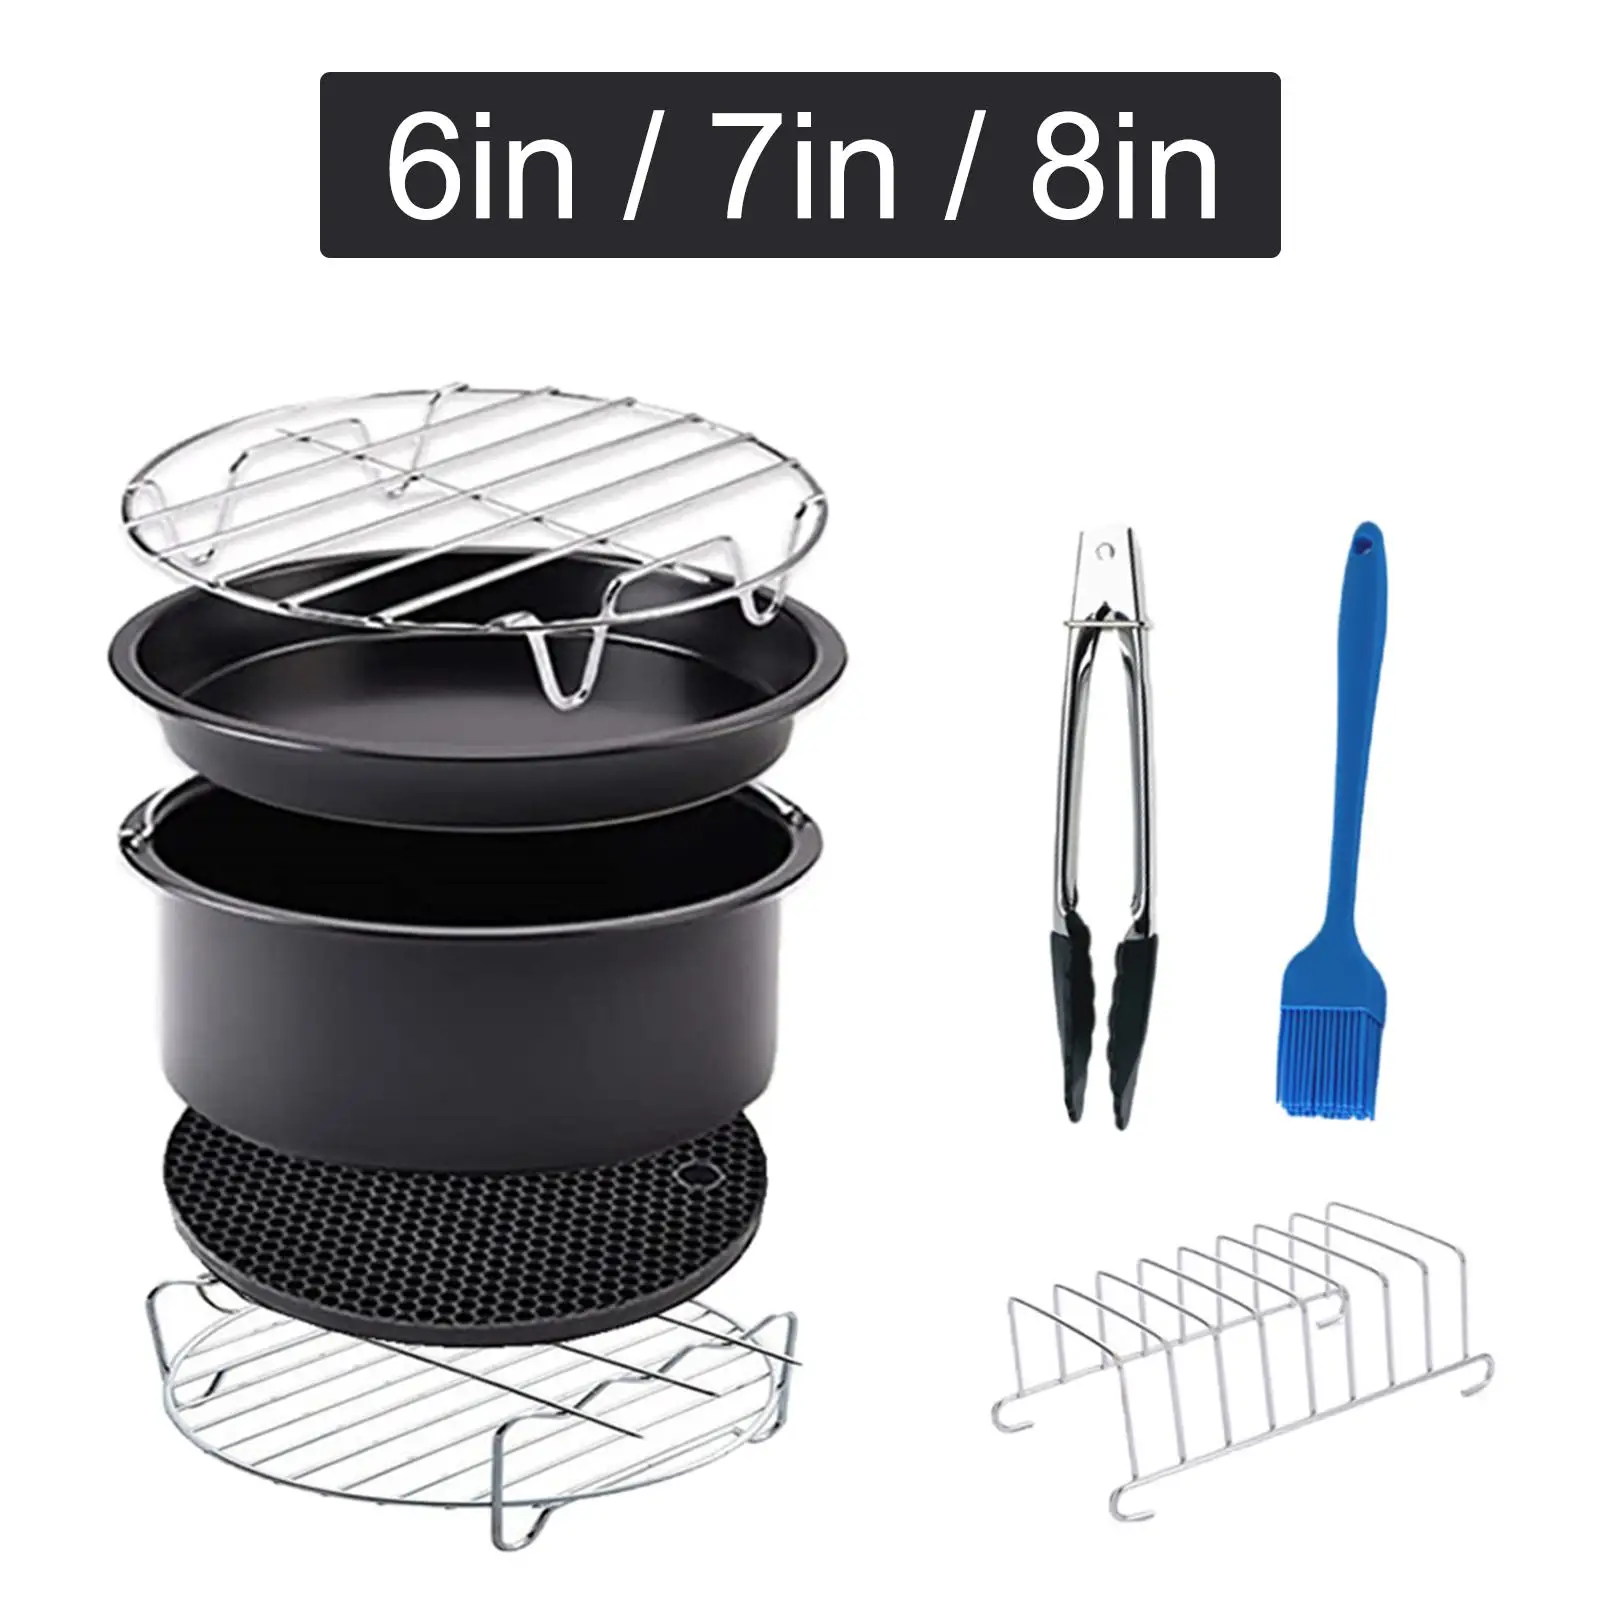 Air Fryer Accessories Air Fryer Liners Cake Pan Oil Brush for Home BBQ Cooking Baking